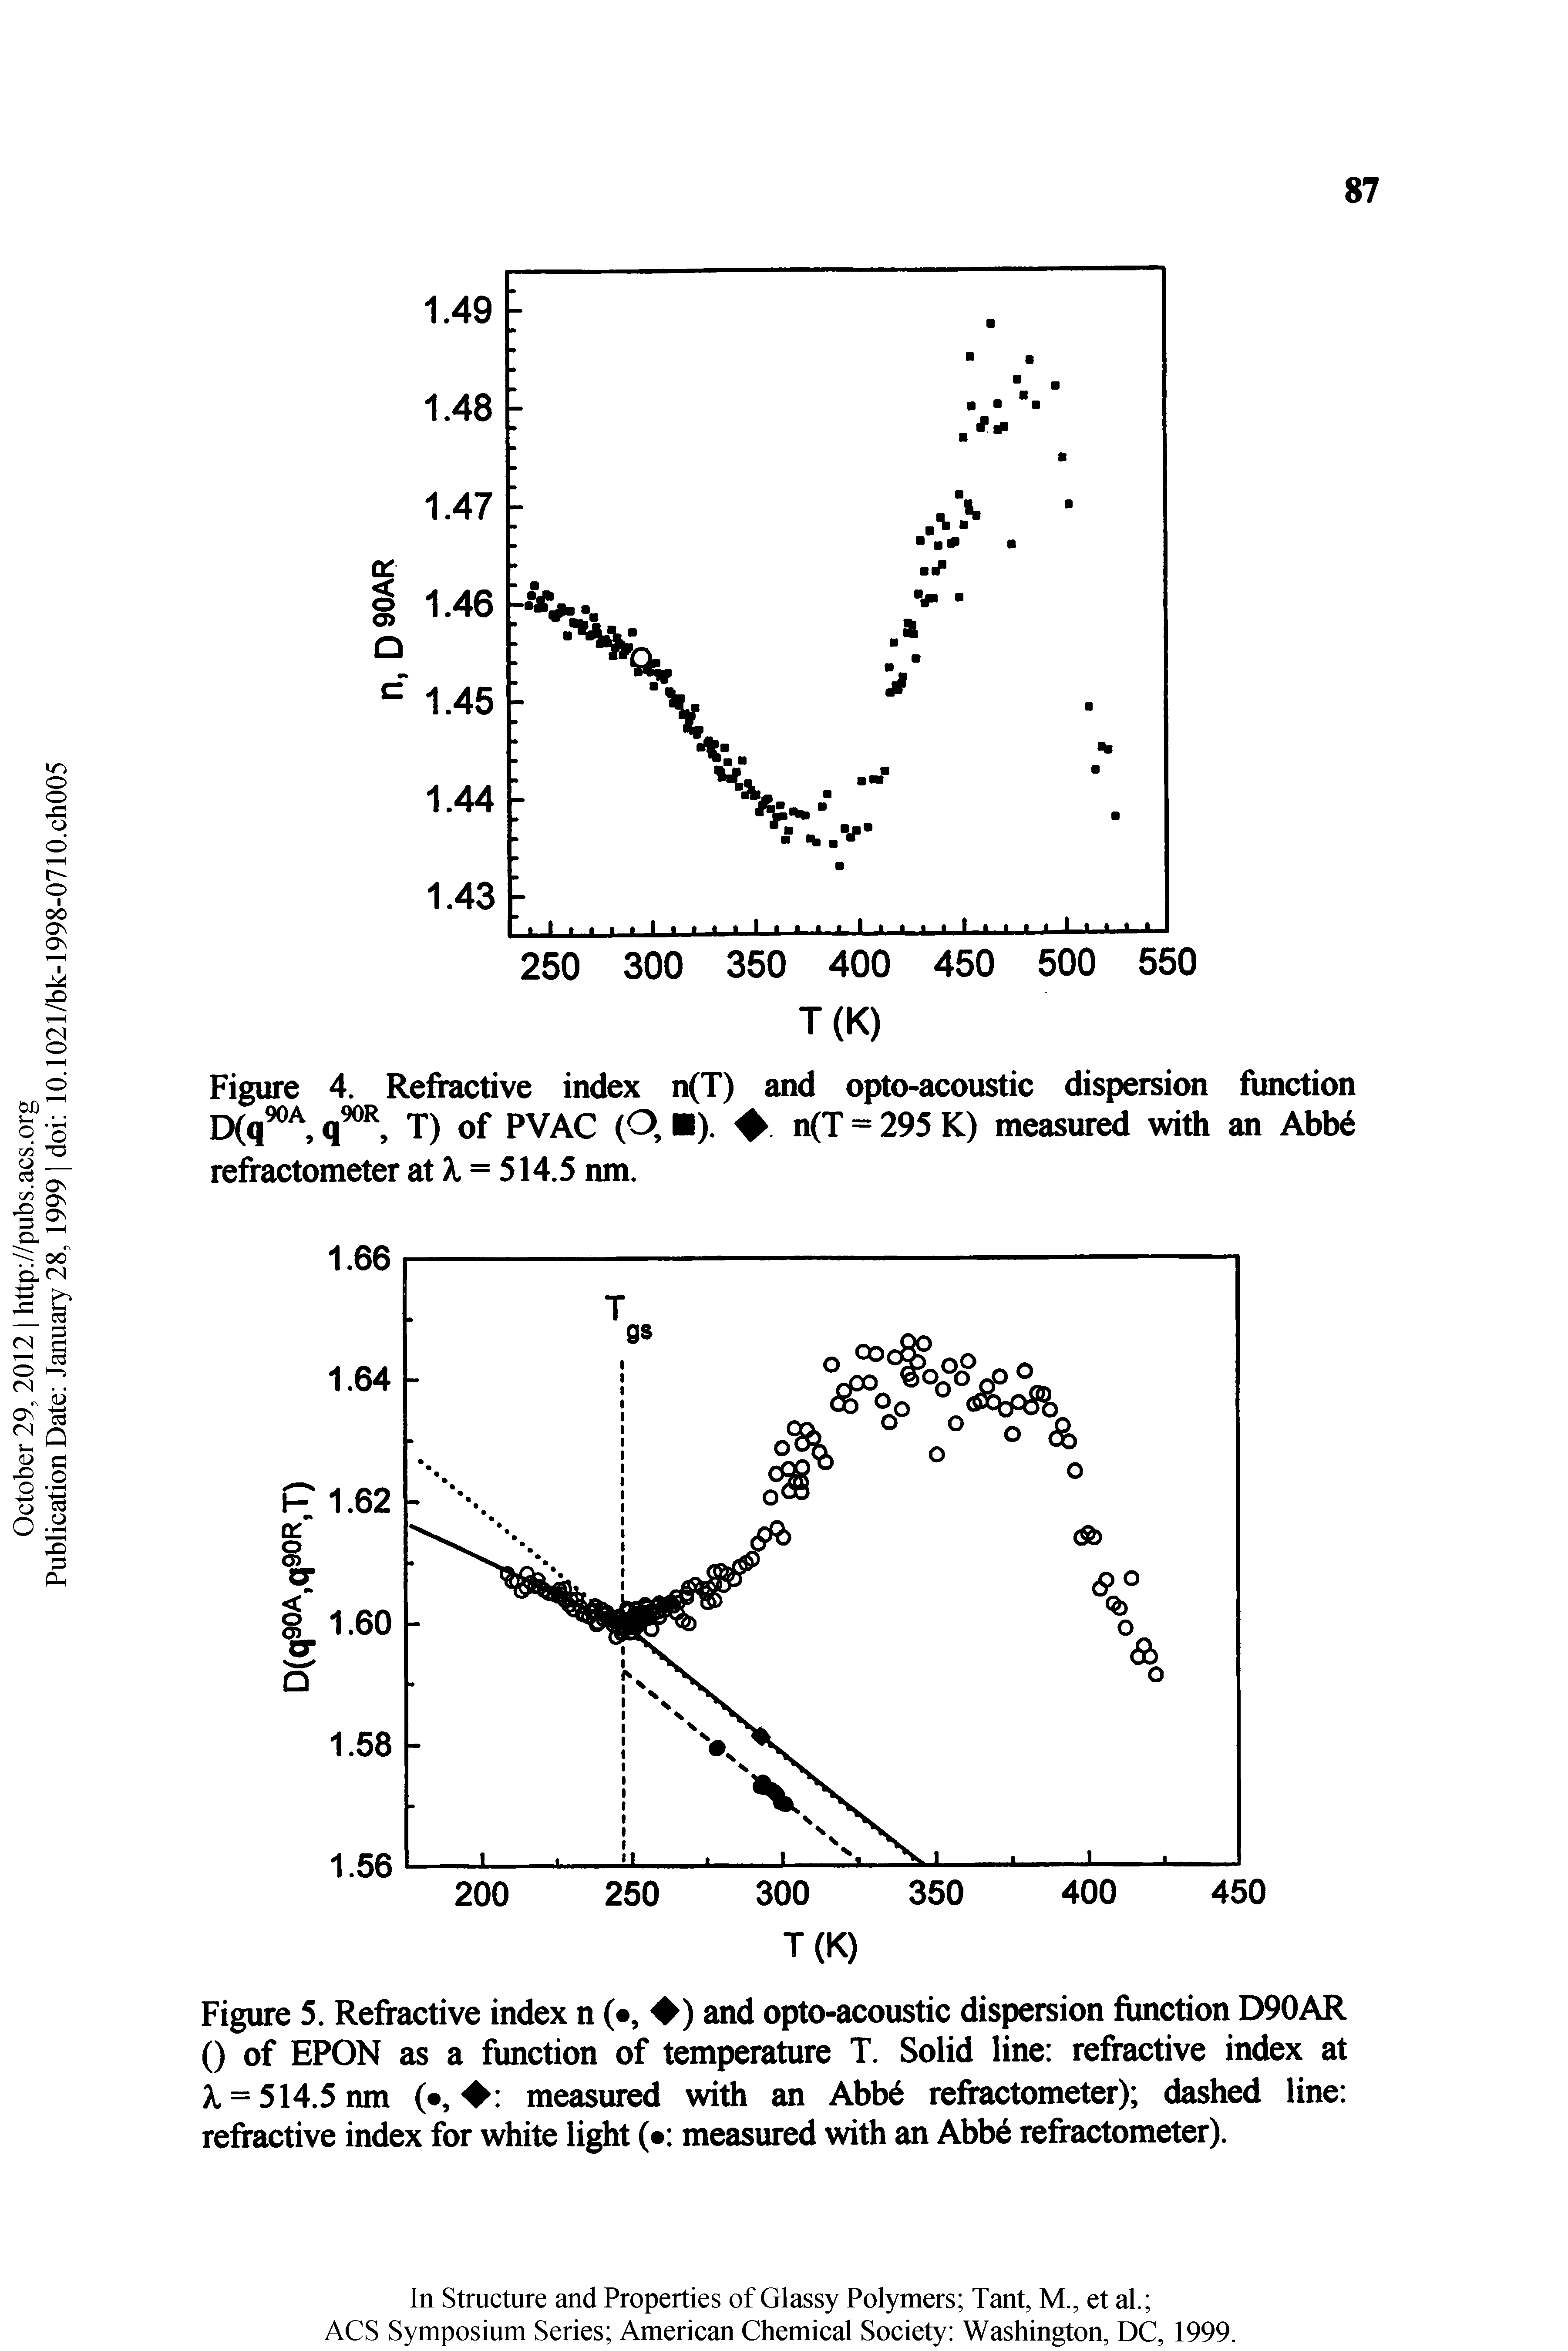 Figure 5. Refiactive index n ( , ) and opto-acoustic dispersion function D90AR 0 of EPON as a function of temperature T. Solid line refiactive index at A. = 514.5nm ( , measured with an AbW refiactometer) dashed line refiactive index for white light ( measured with an Abb6 refiactometer).